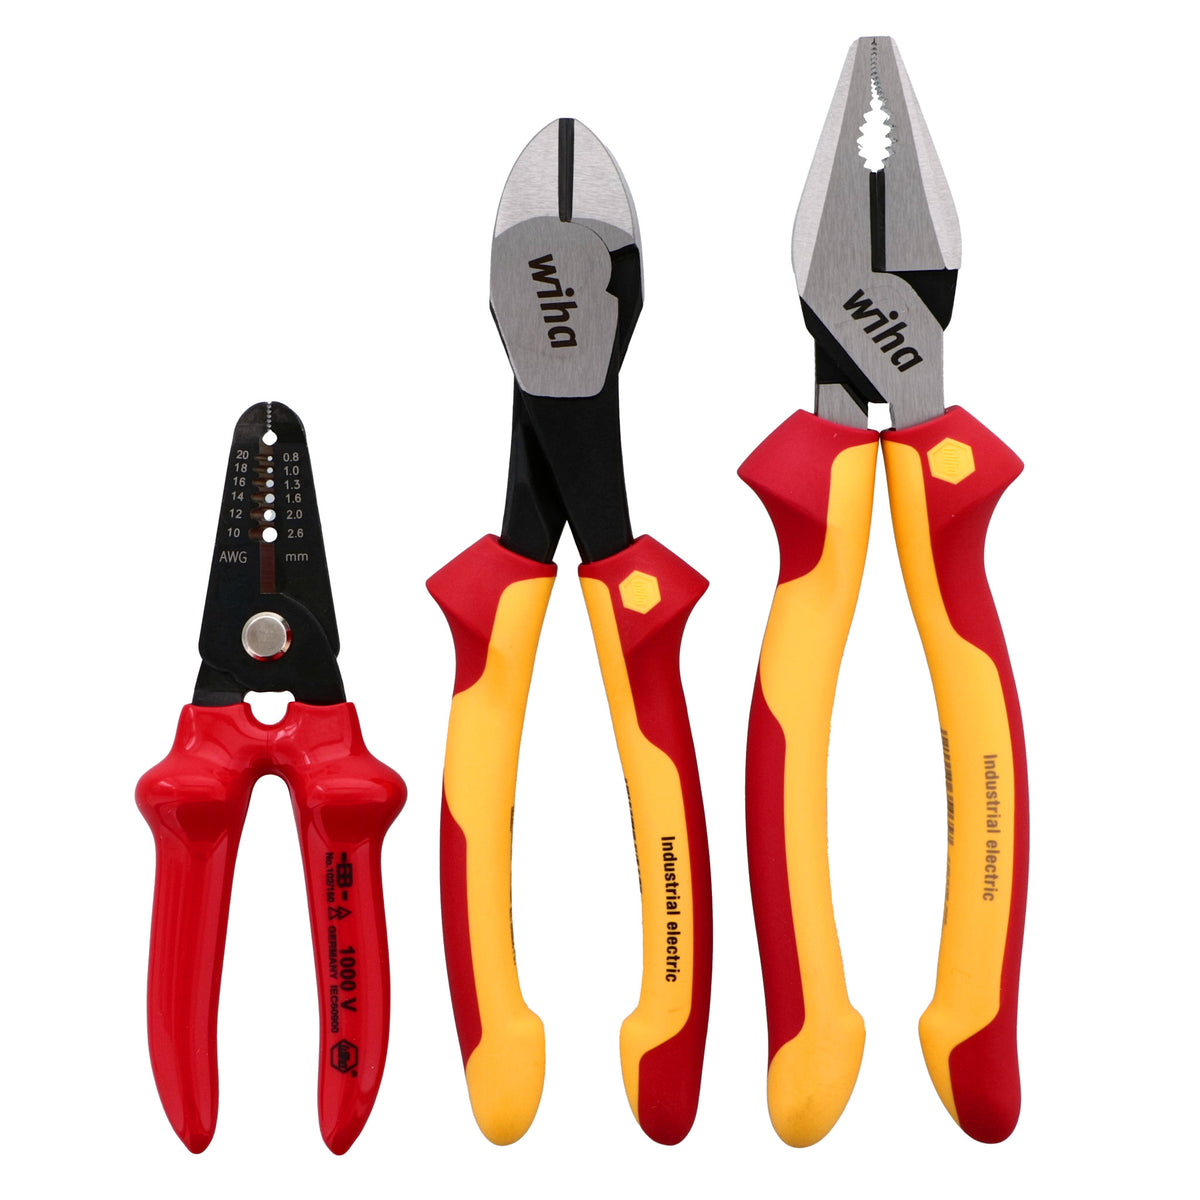 Wiha 32981 Insulated Industrial Pliers/Cutters Set